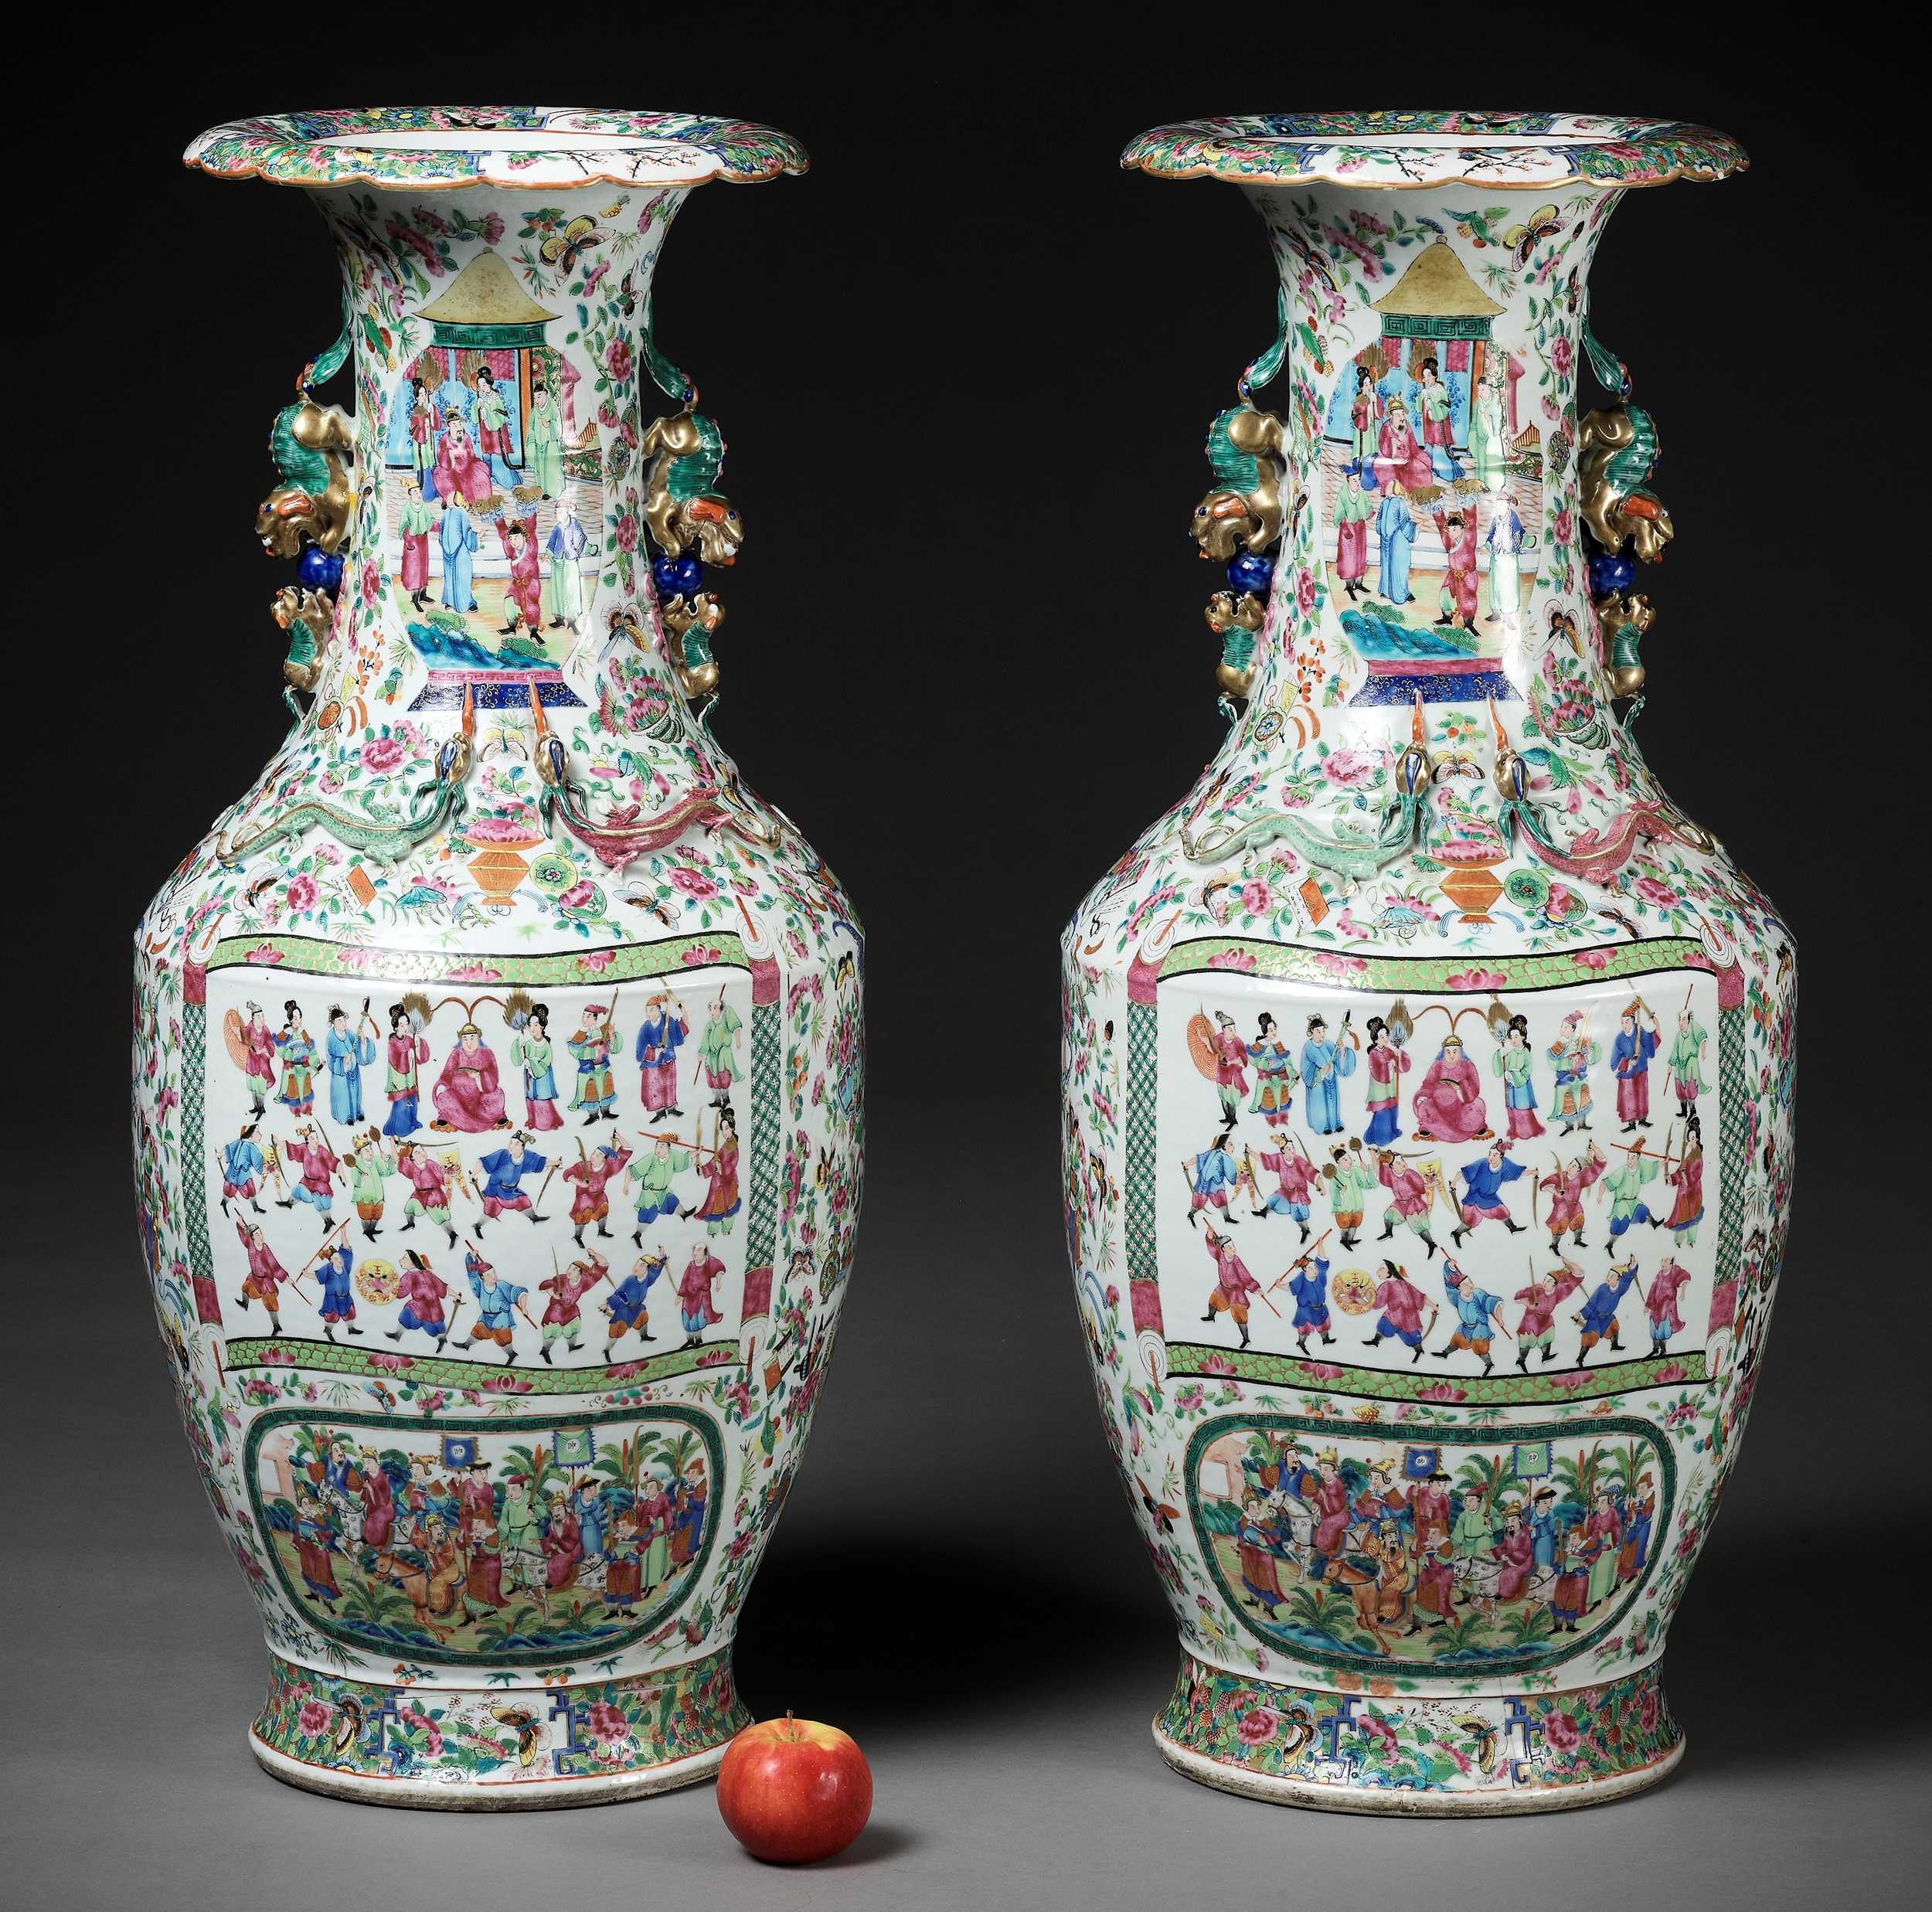 Lot 130 - AN EXCEPTIONALLY LARGE PAIR OF FAMILLE ROSE PALACE VASES, 19TH CENTURY